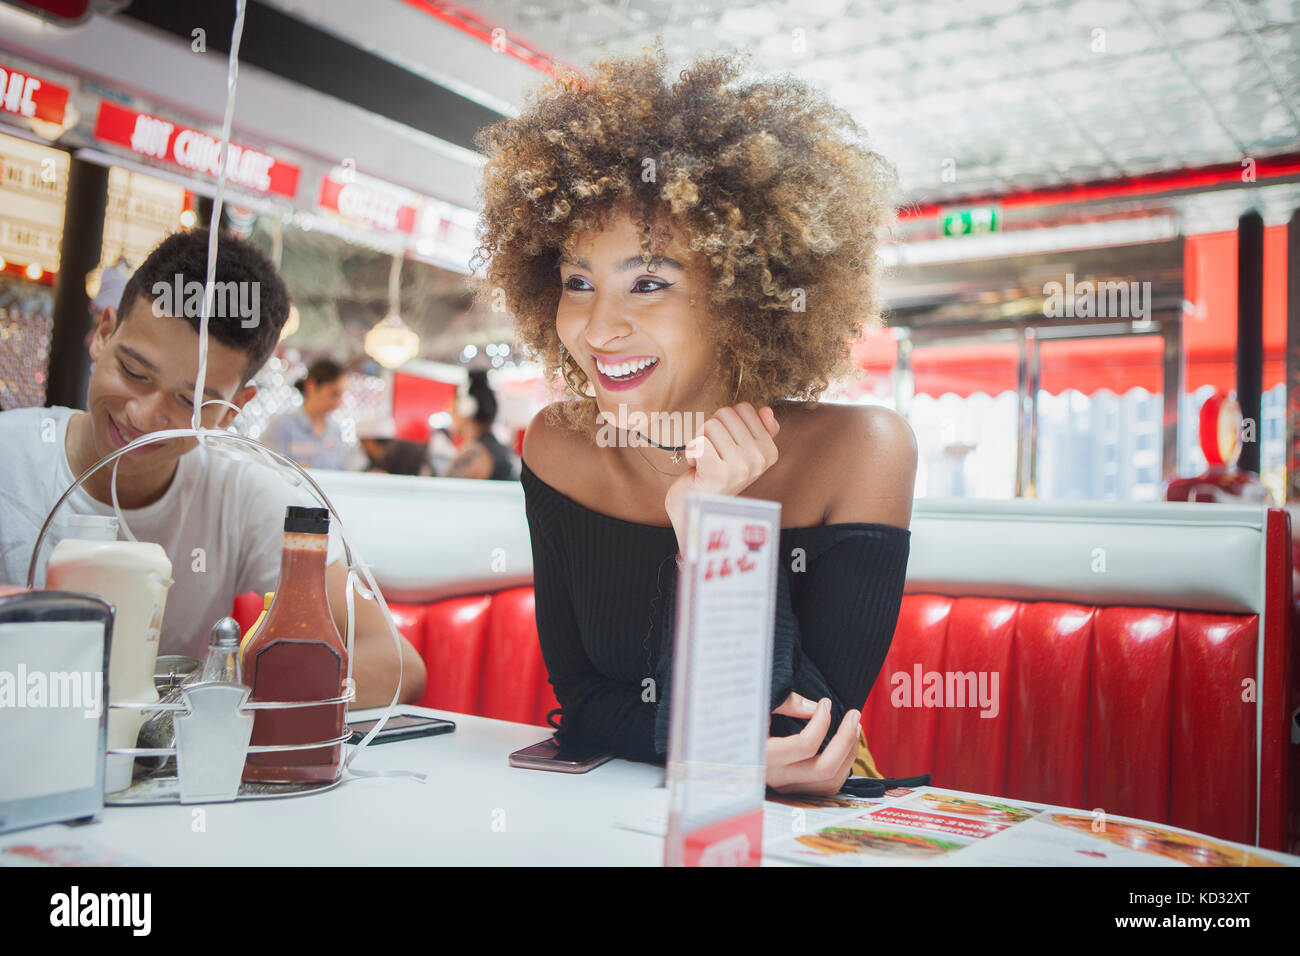 Friends sitting in diner, woman, smiling Banque D'Images